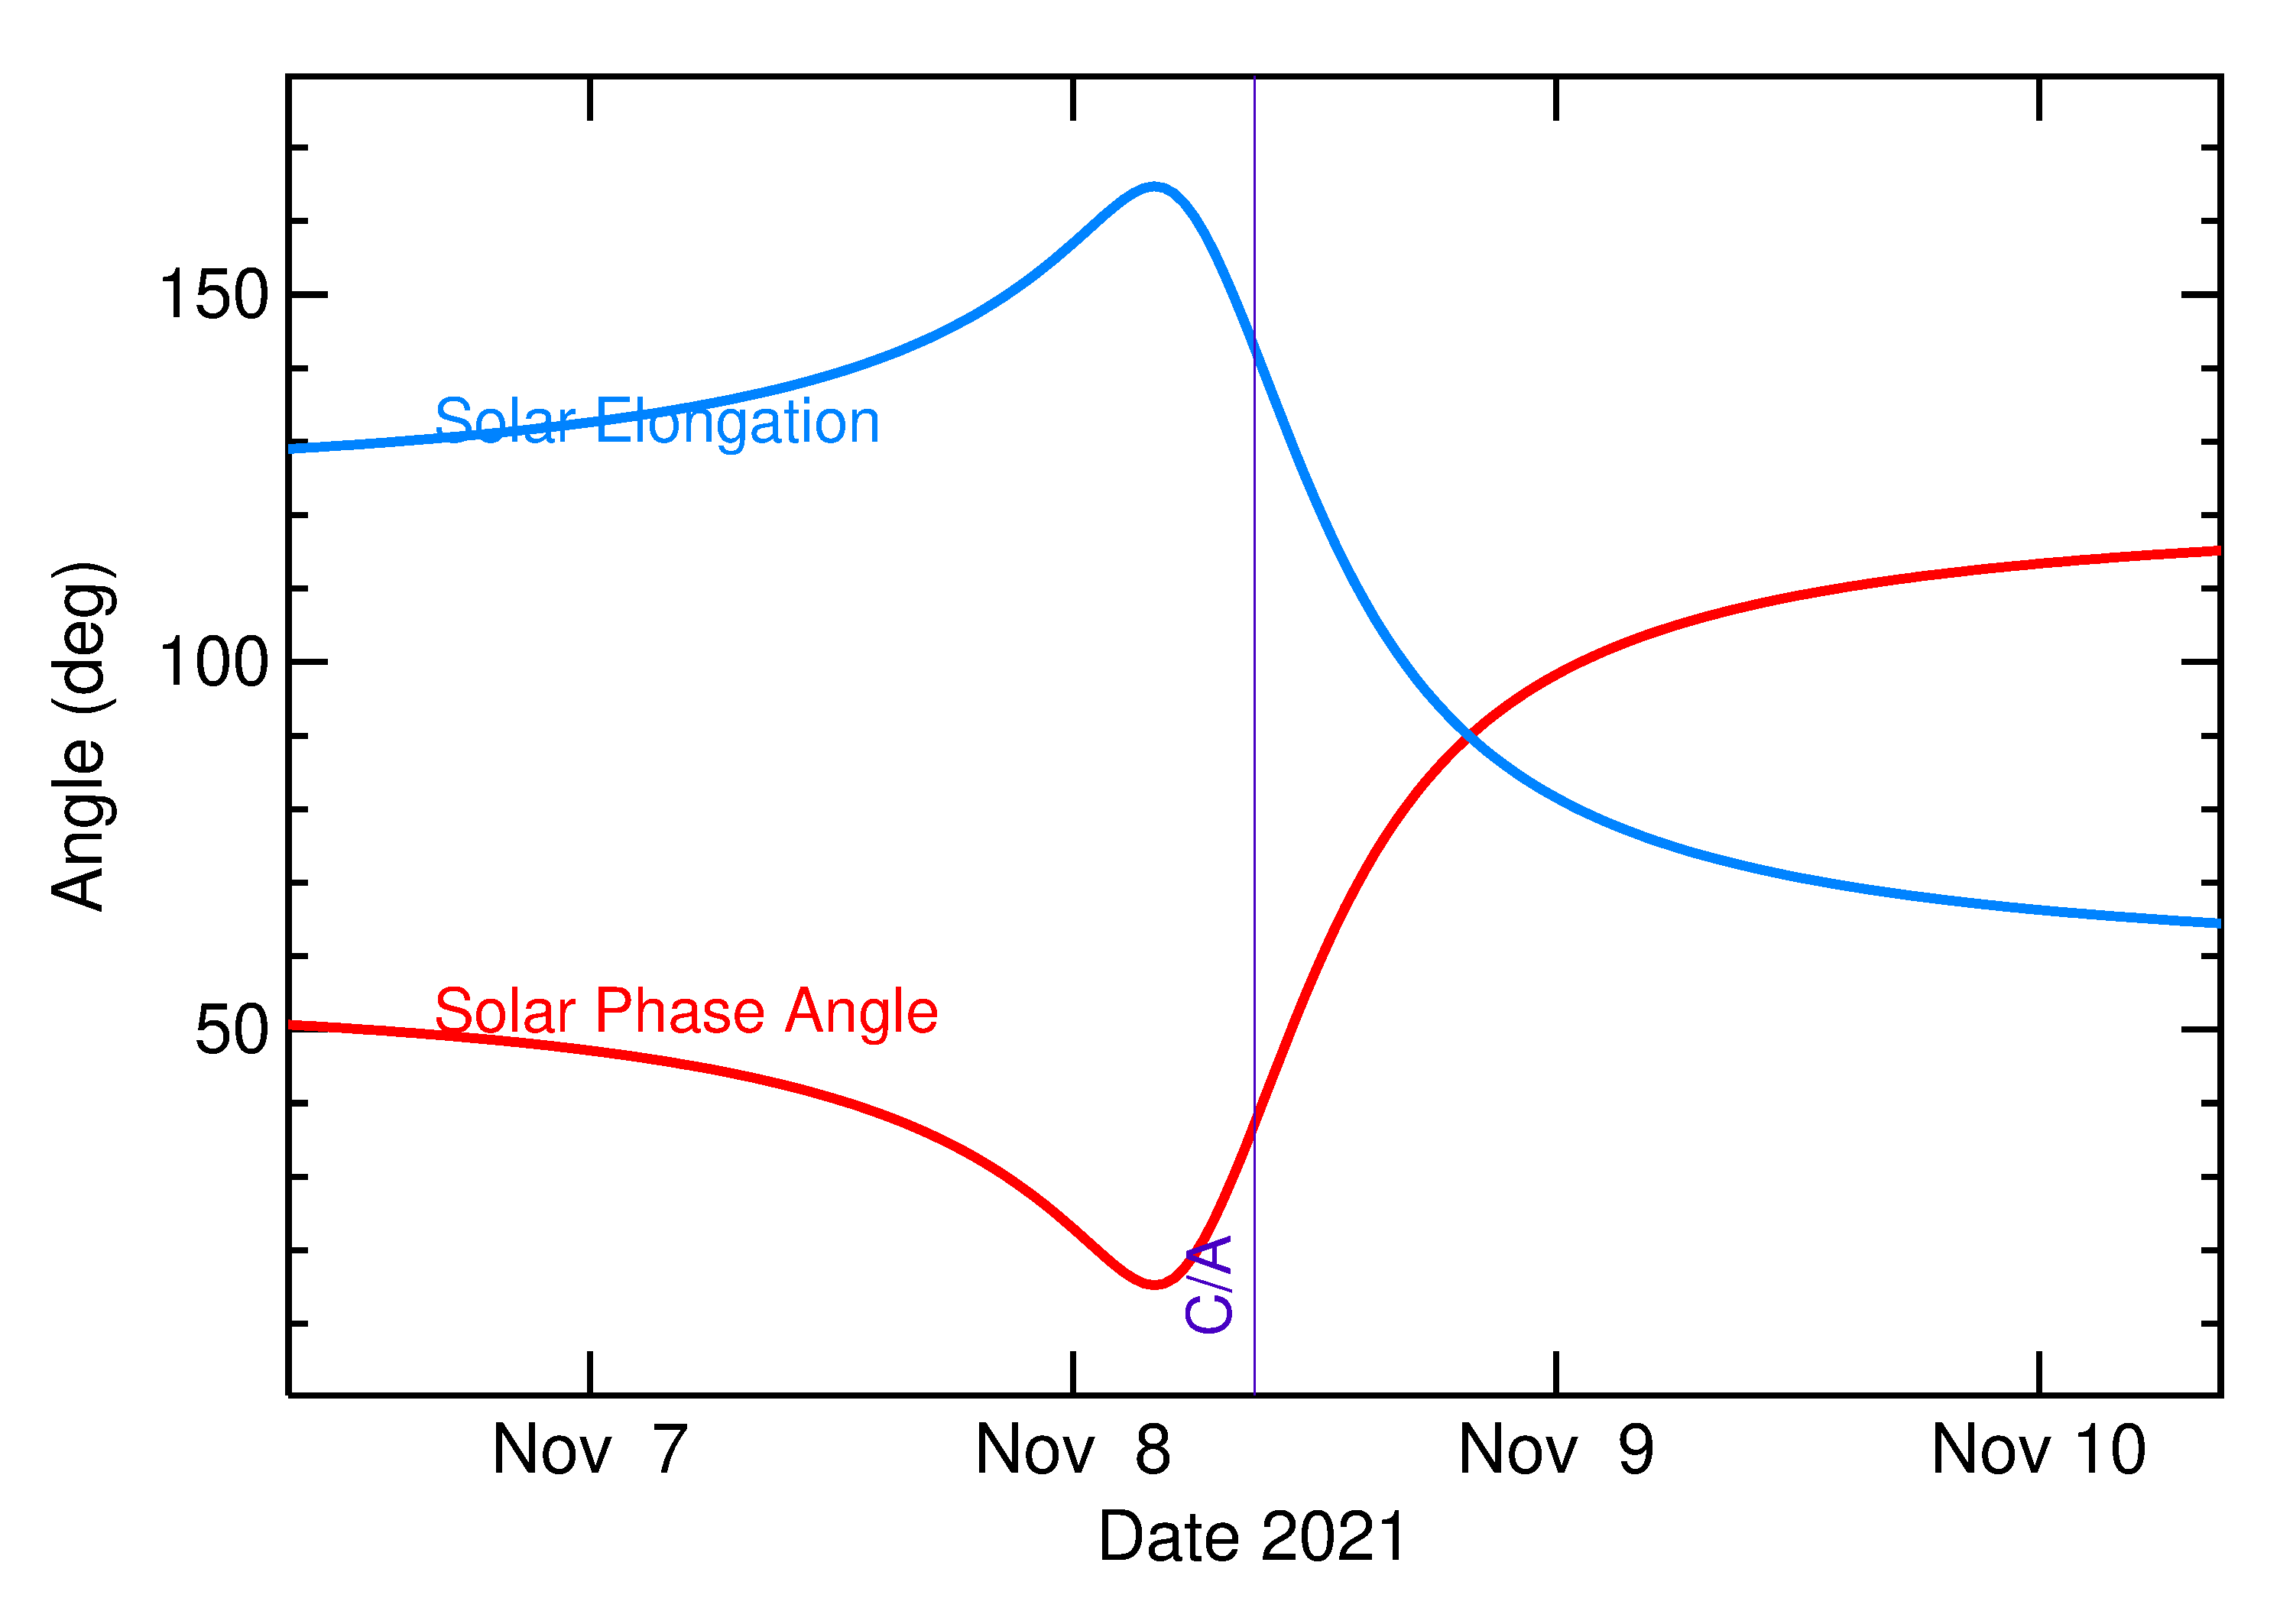 Solar Elongation and Solar Phase Angle of 2021 VL3 in the days around closest approach